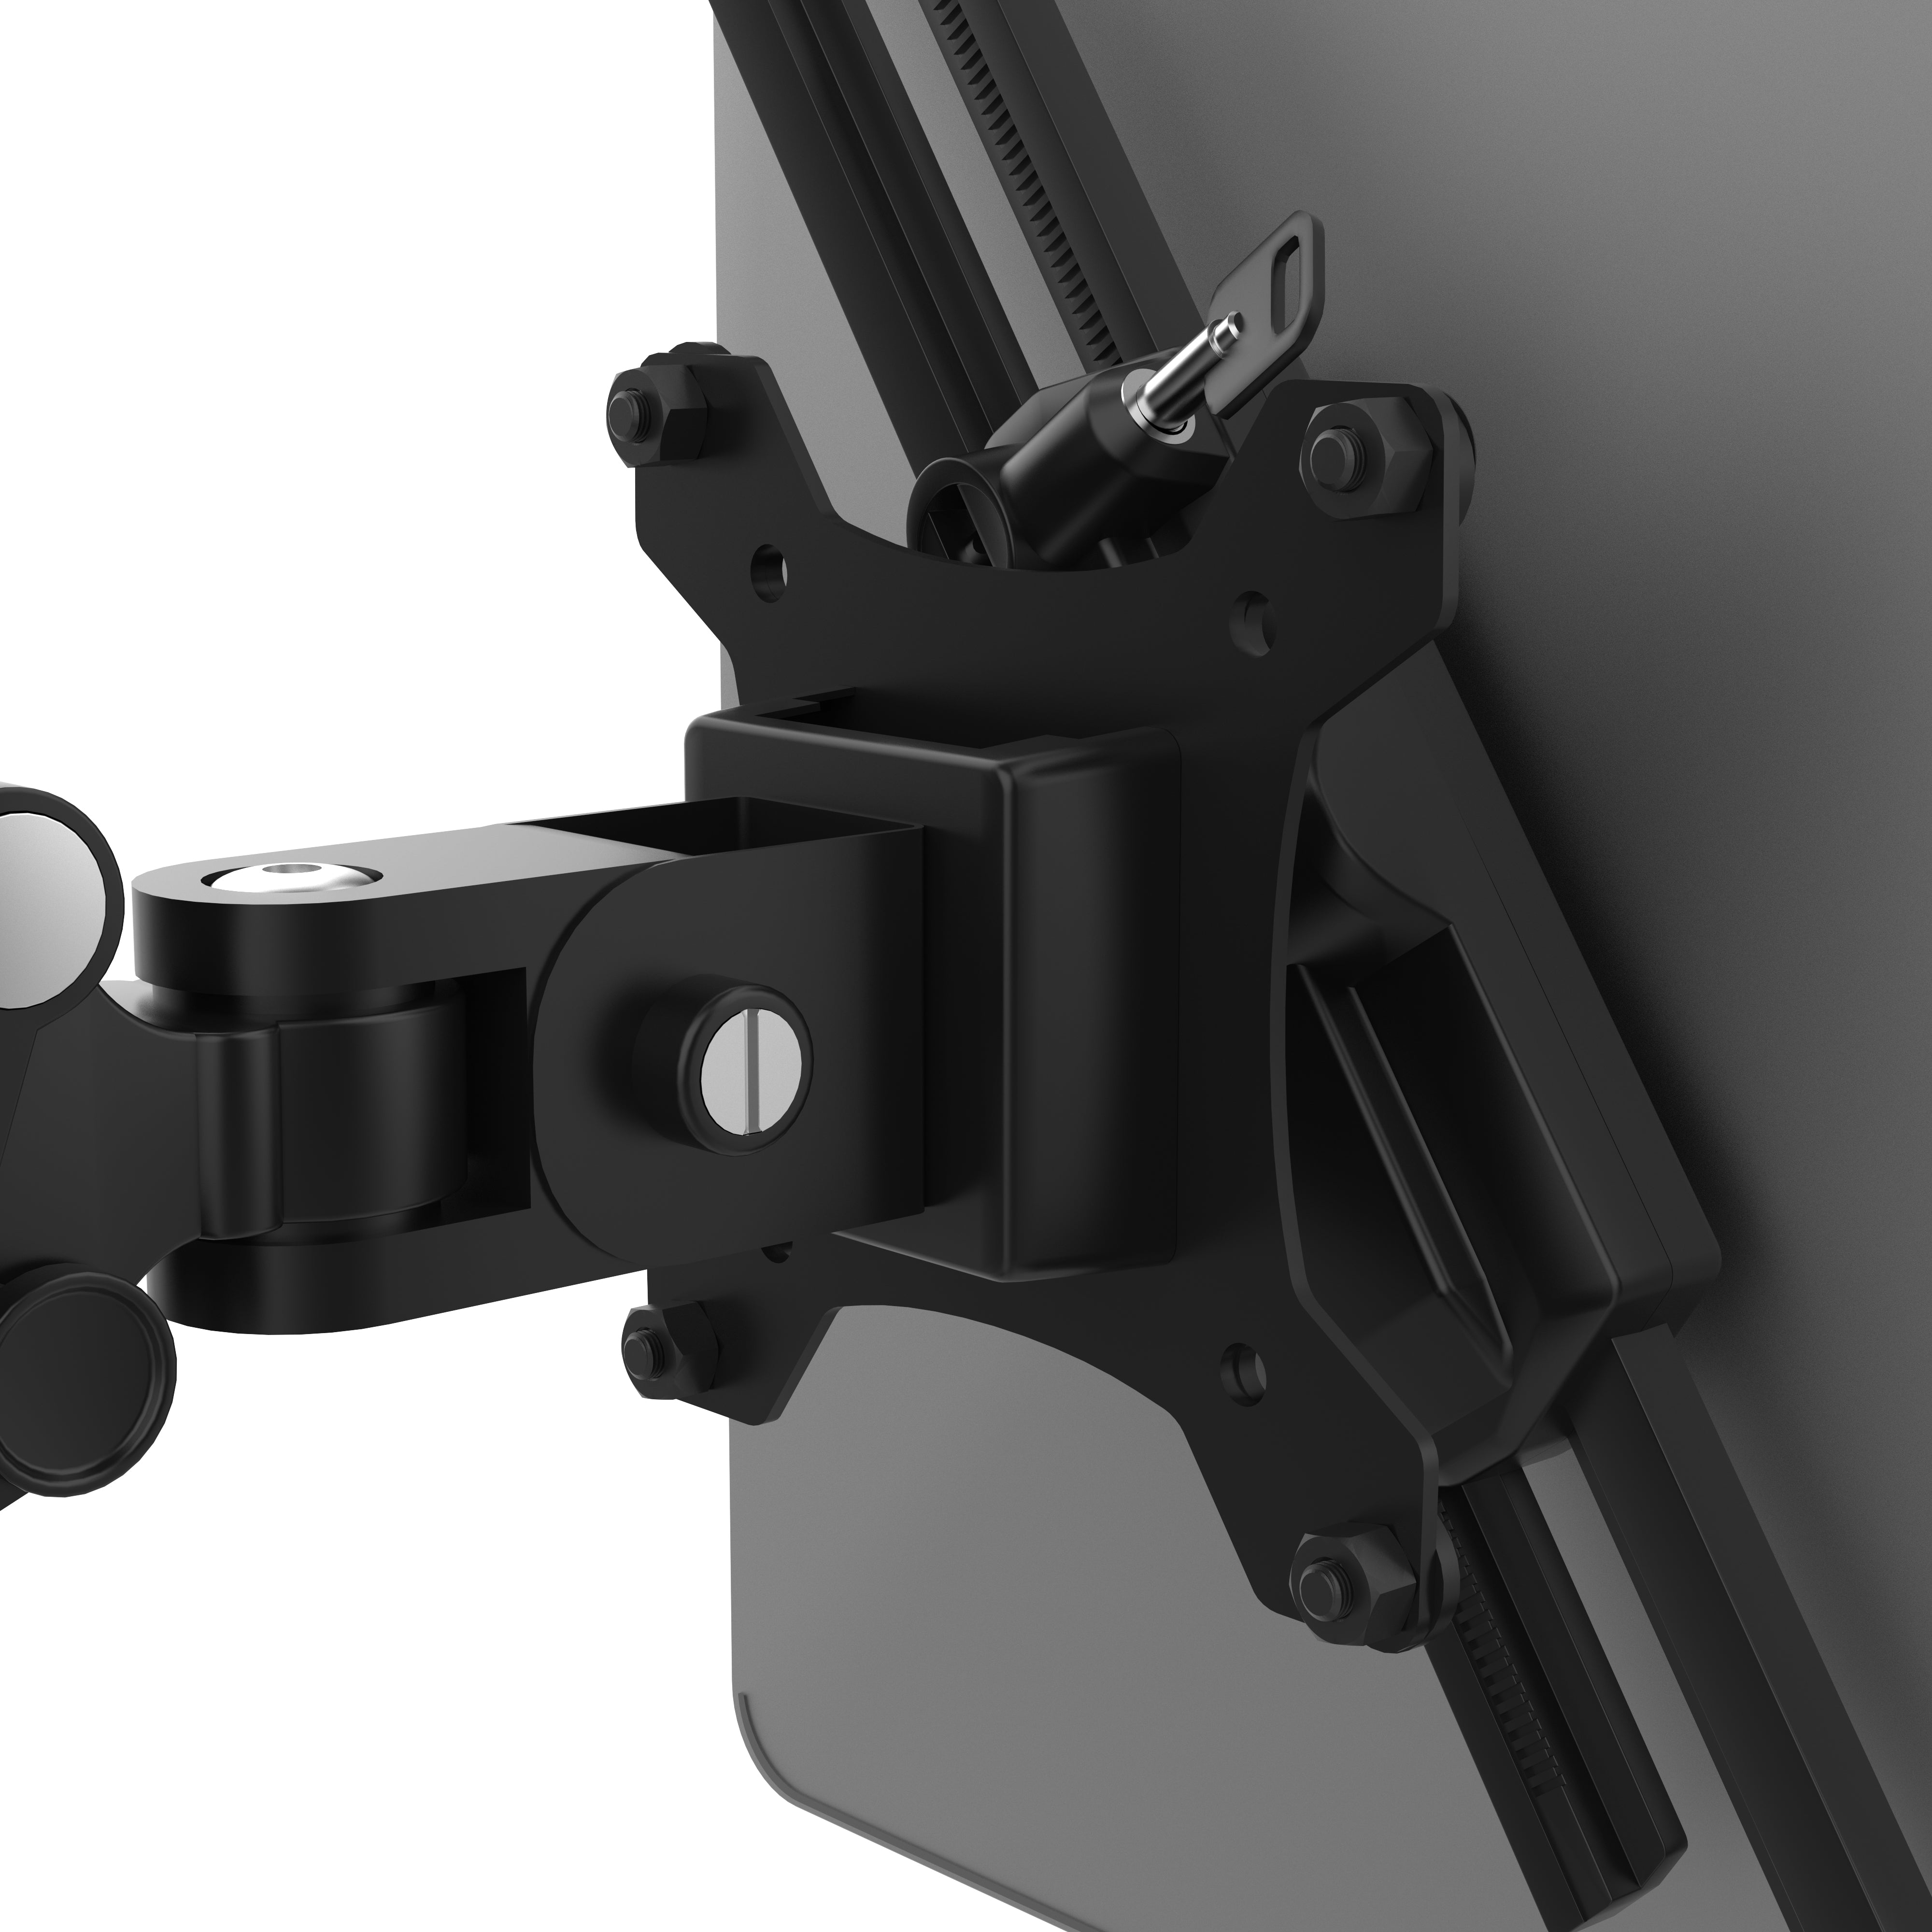 Security Clamp Mount w/ Universal Holder &amp; Full Cable Management